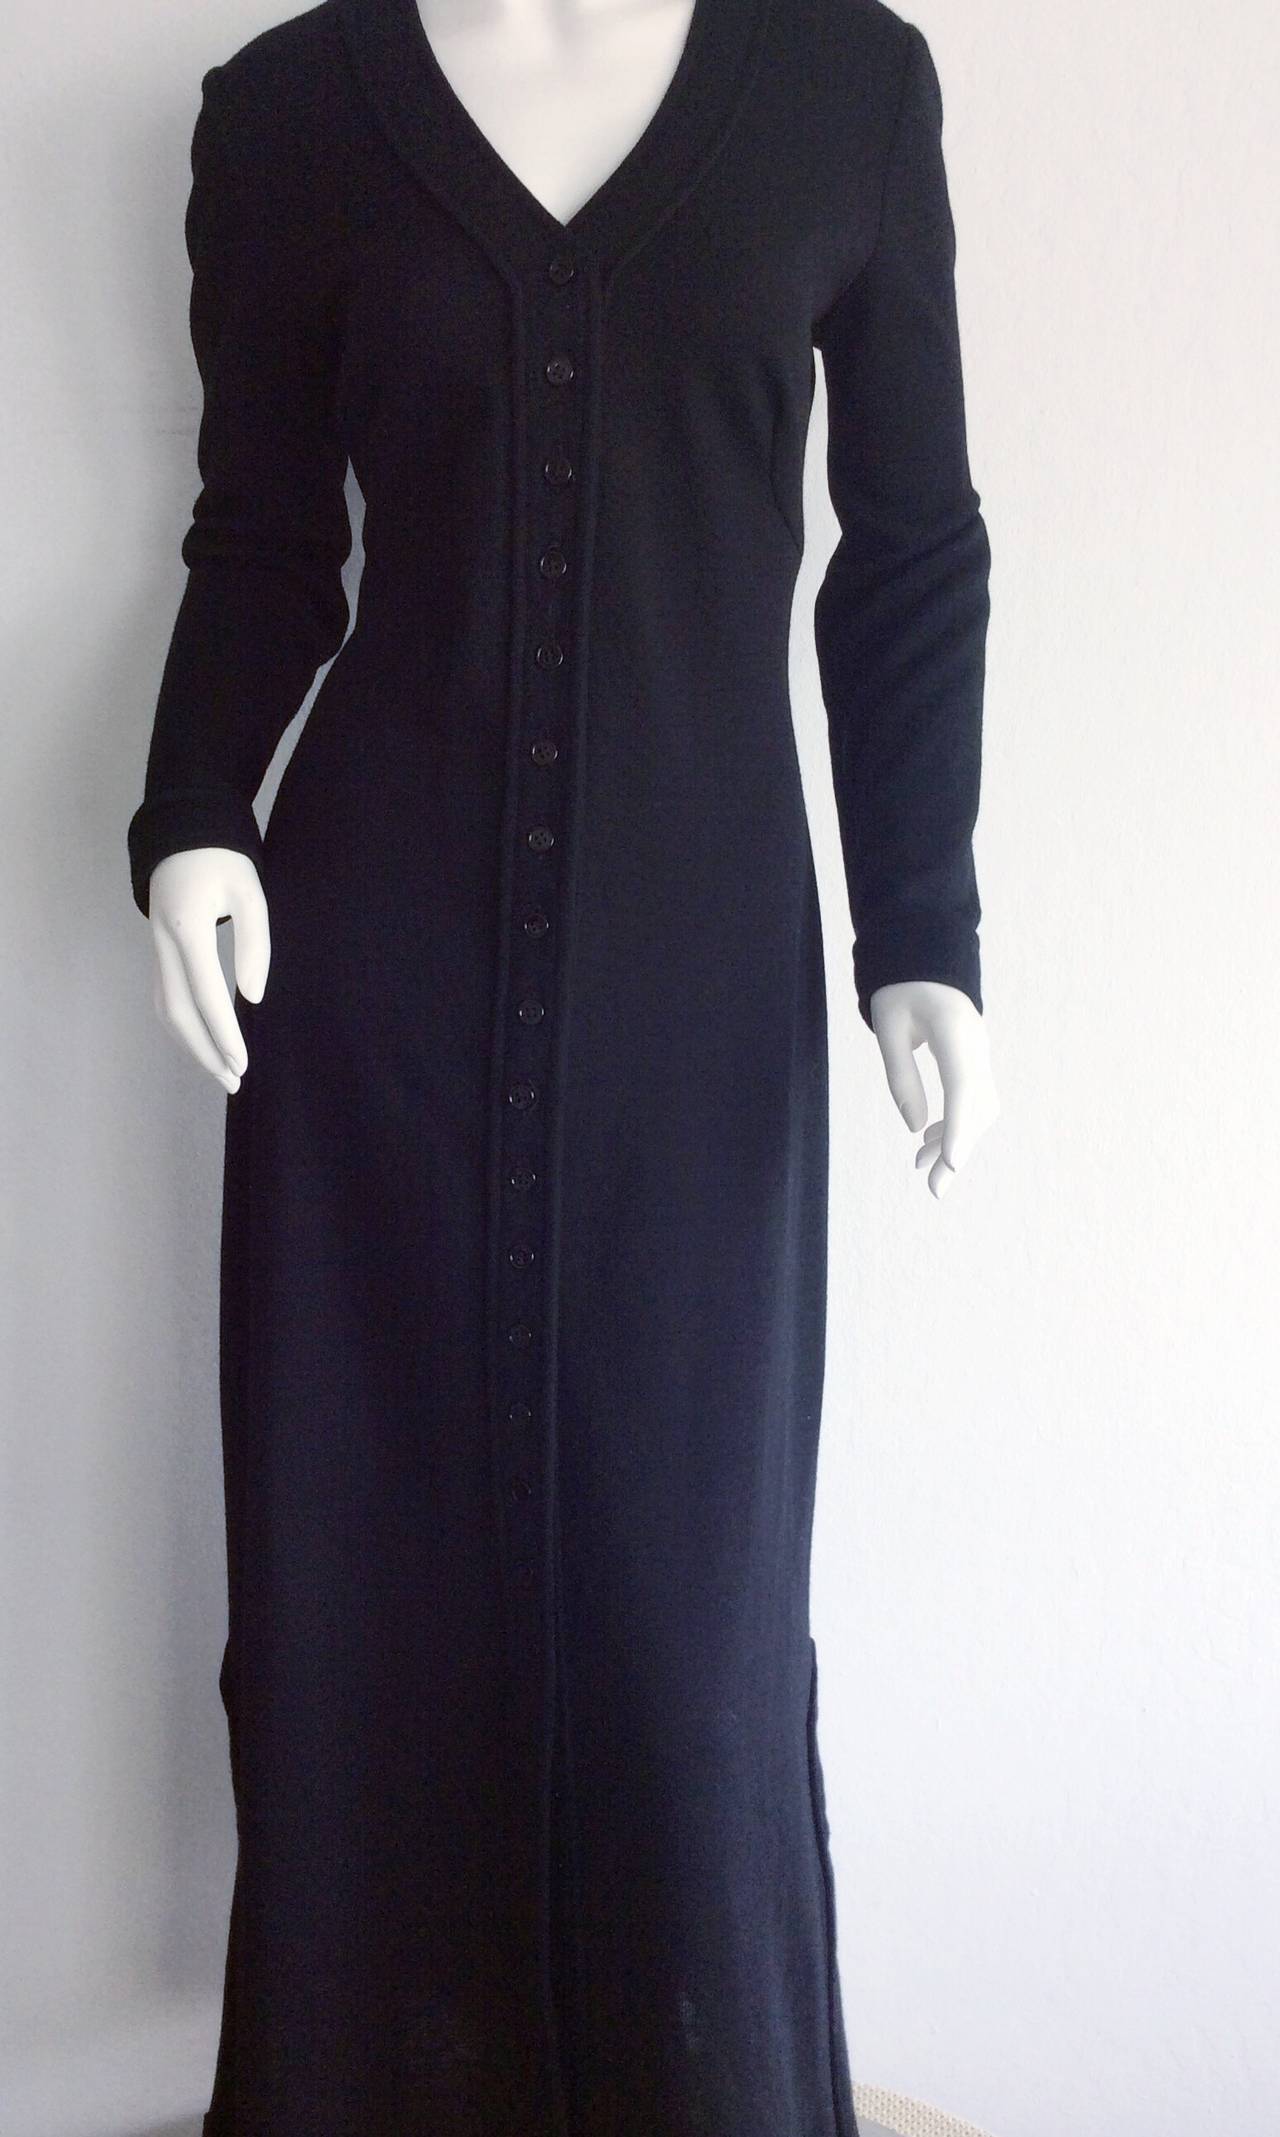 Incredible Vintage Mary Quant for Bonwit Teller Black Wool Shirt Dress 3